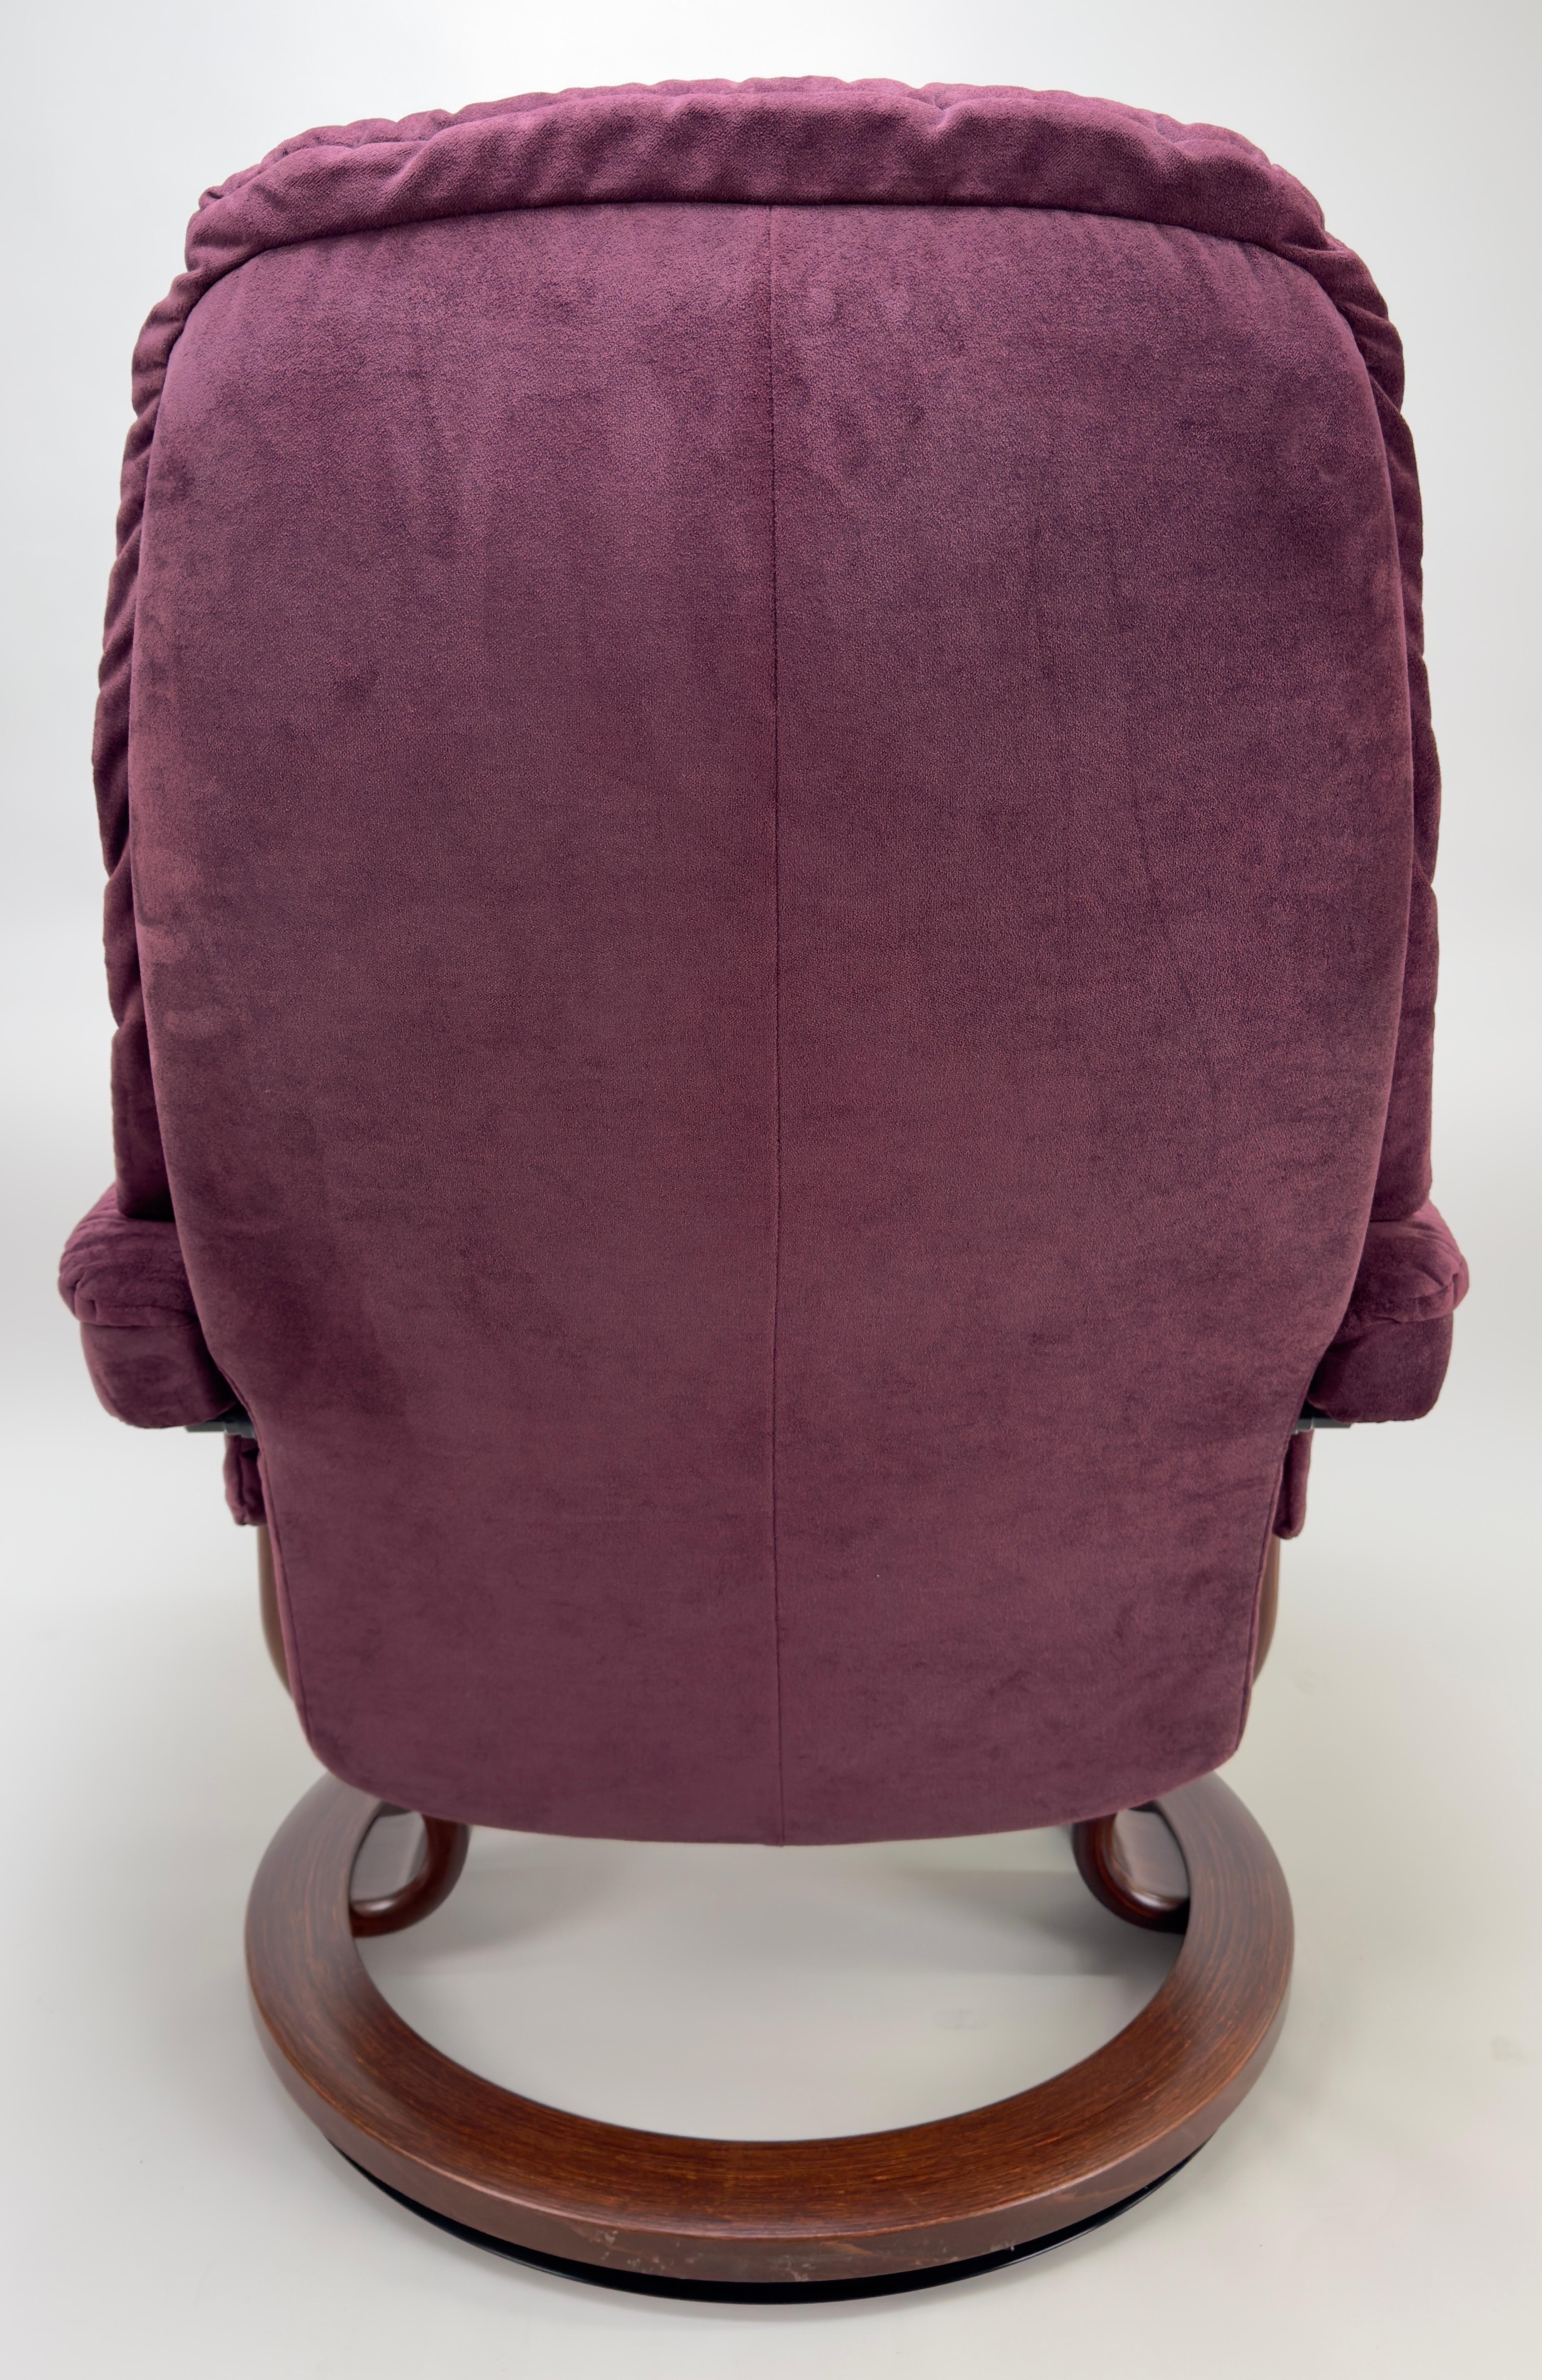 Scandinavian Ekornes Stressless Adjustable Purple Suede  Recliner & Ottoman  In Good Condition For Sale In Plainview, NY